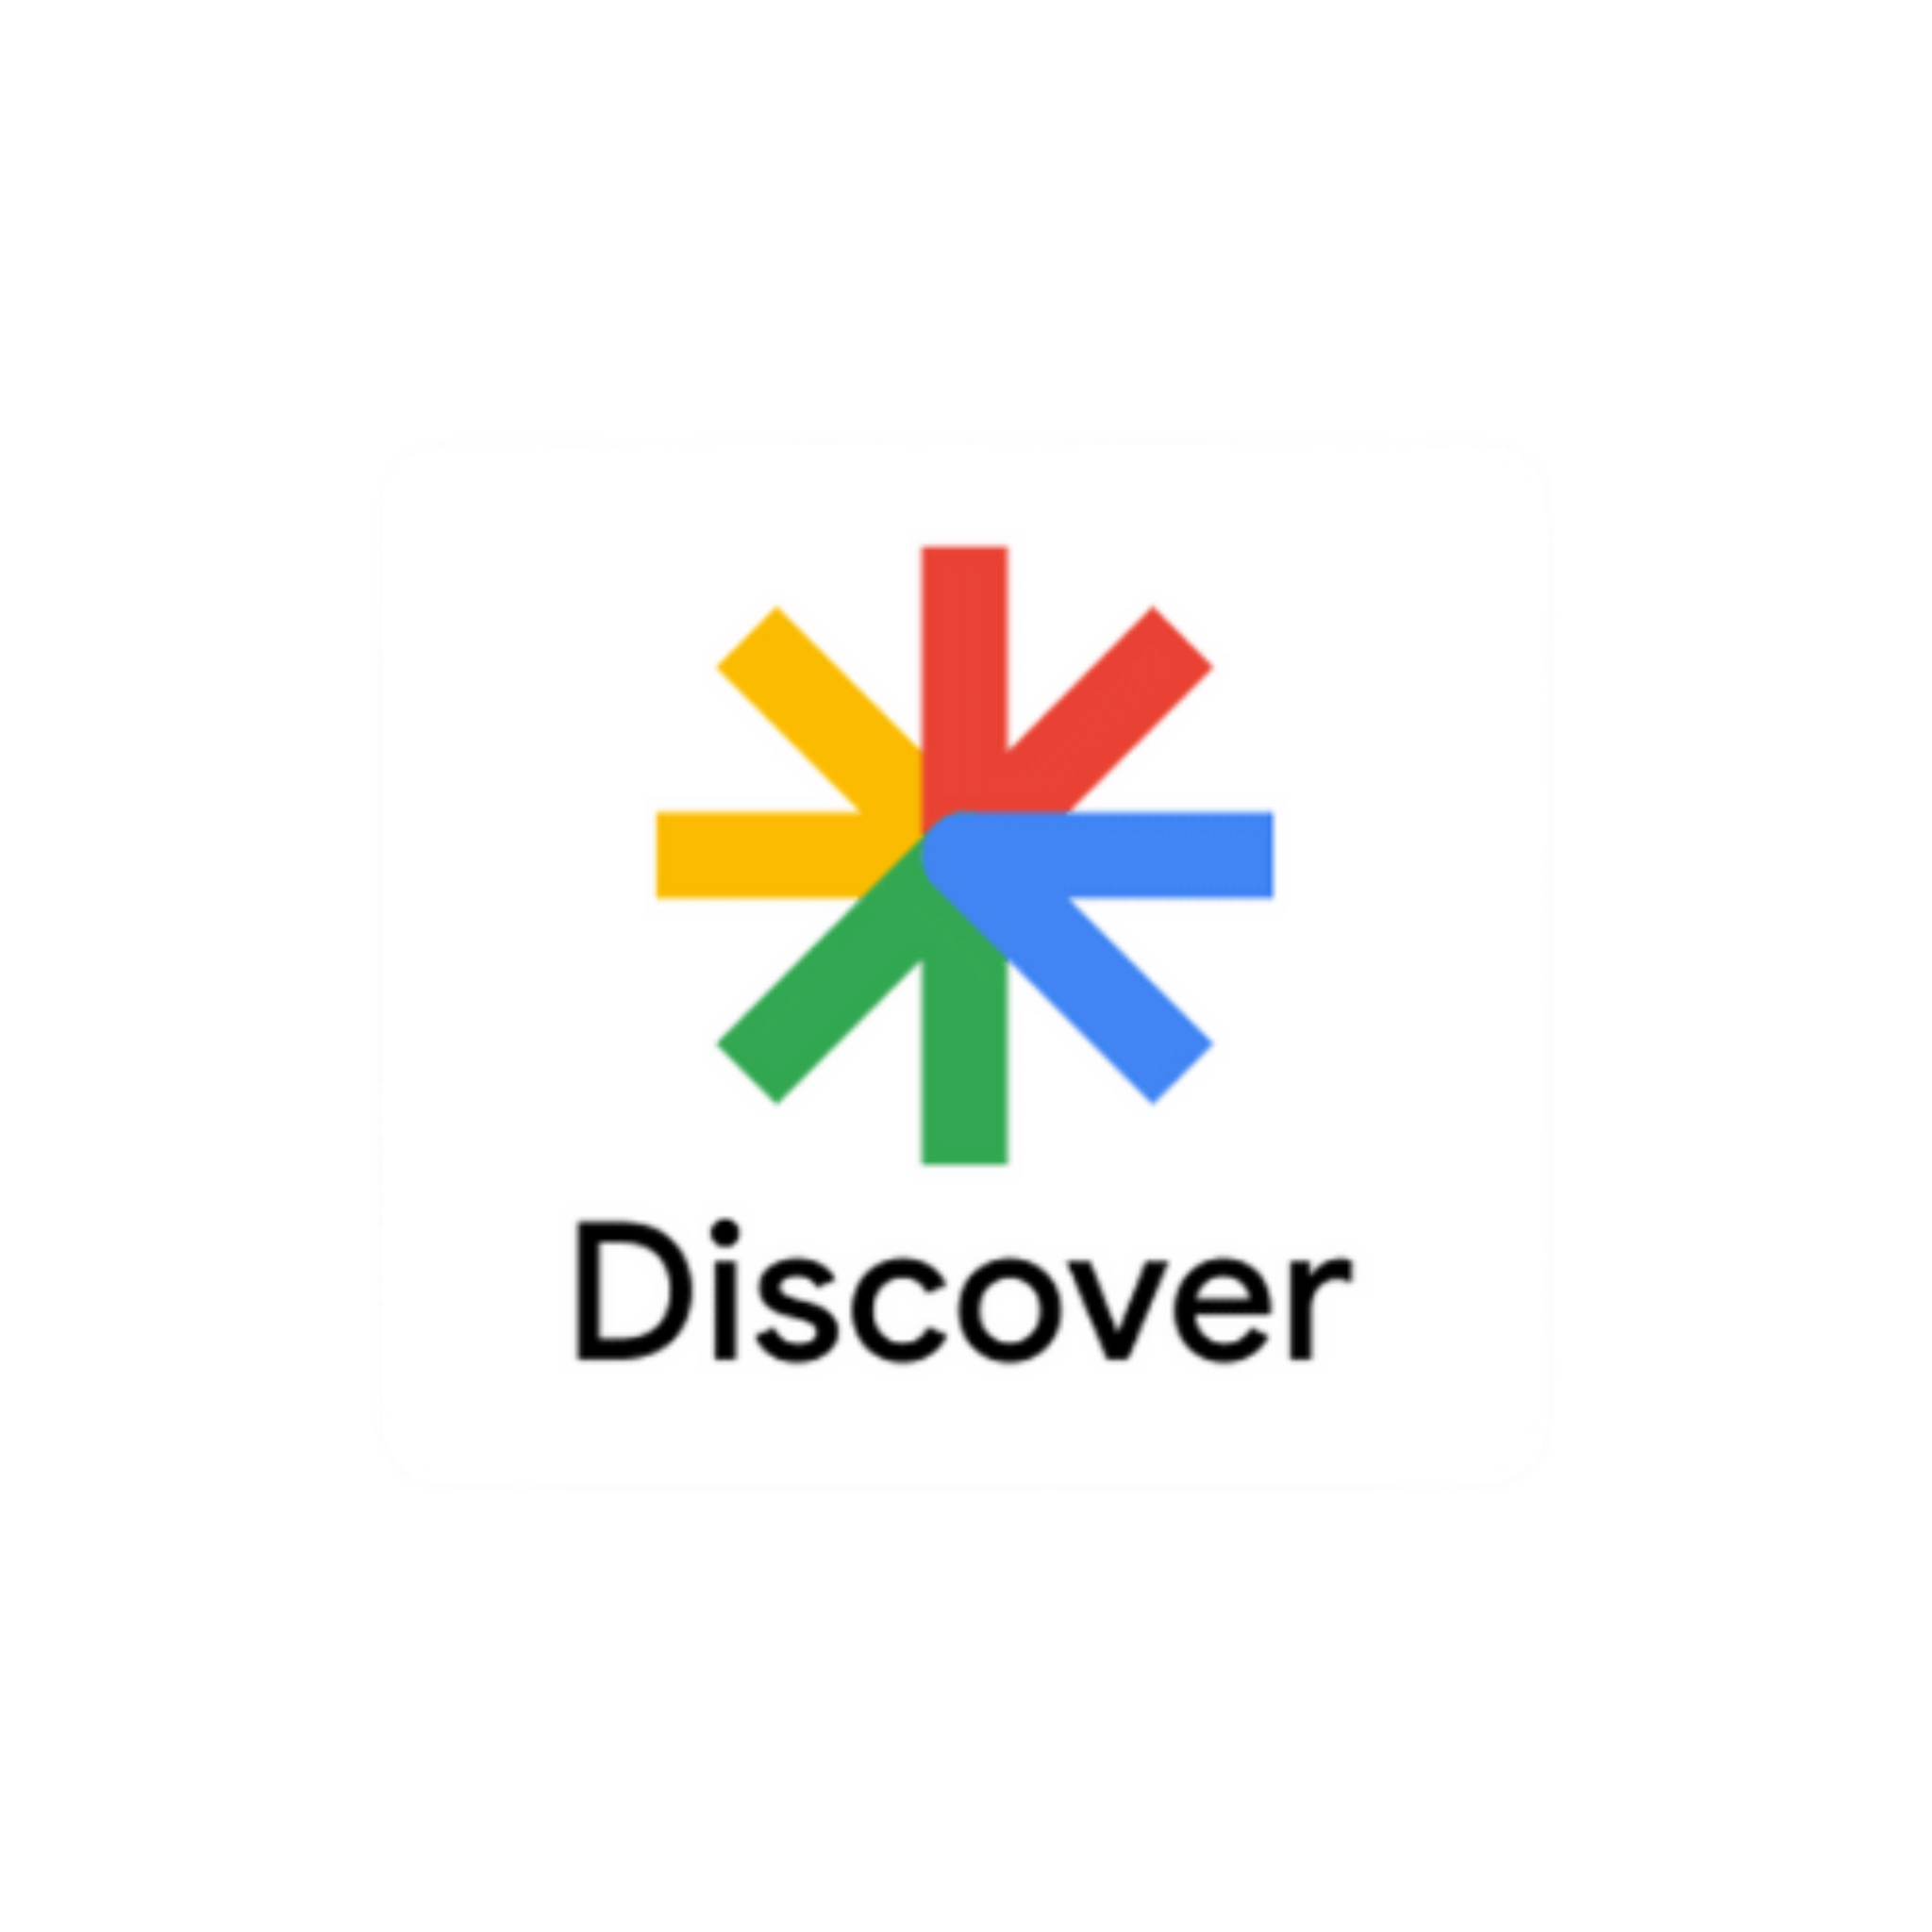 Google Discover front